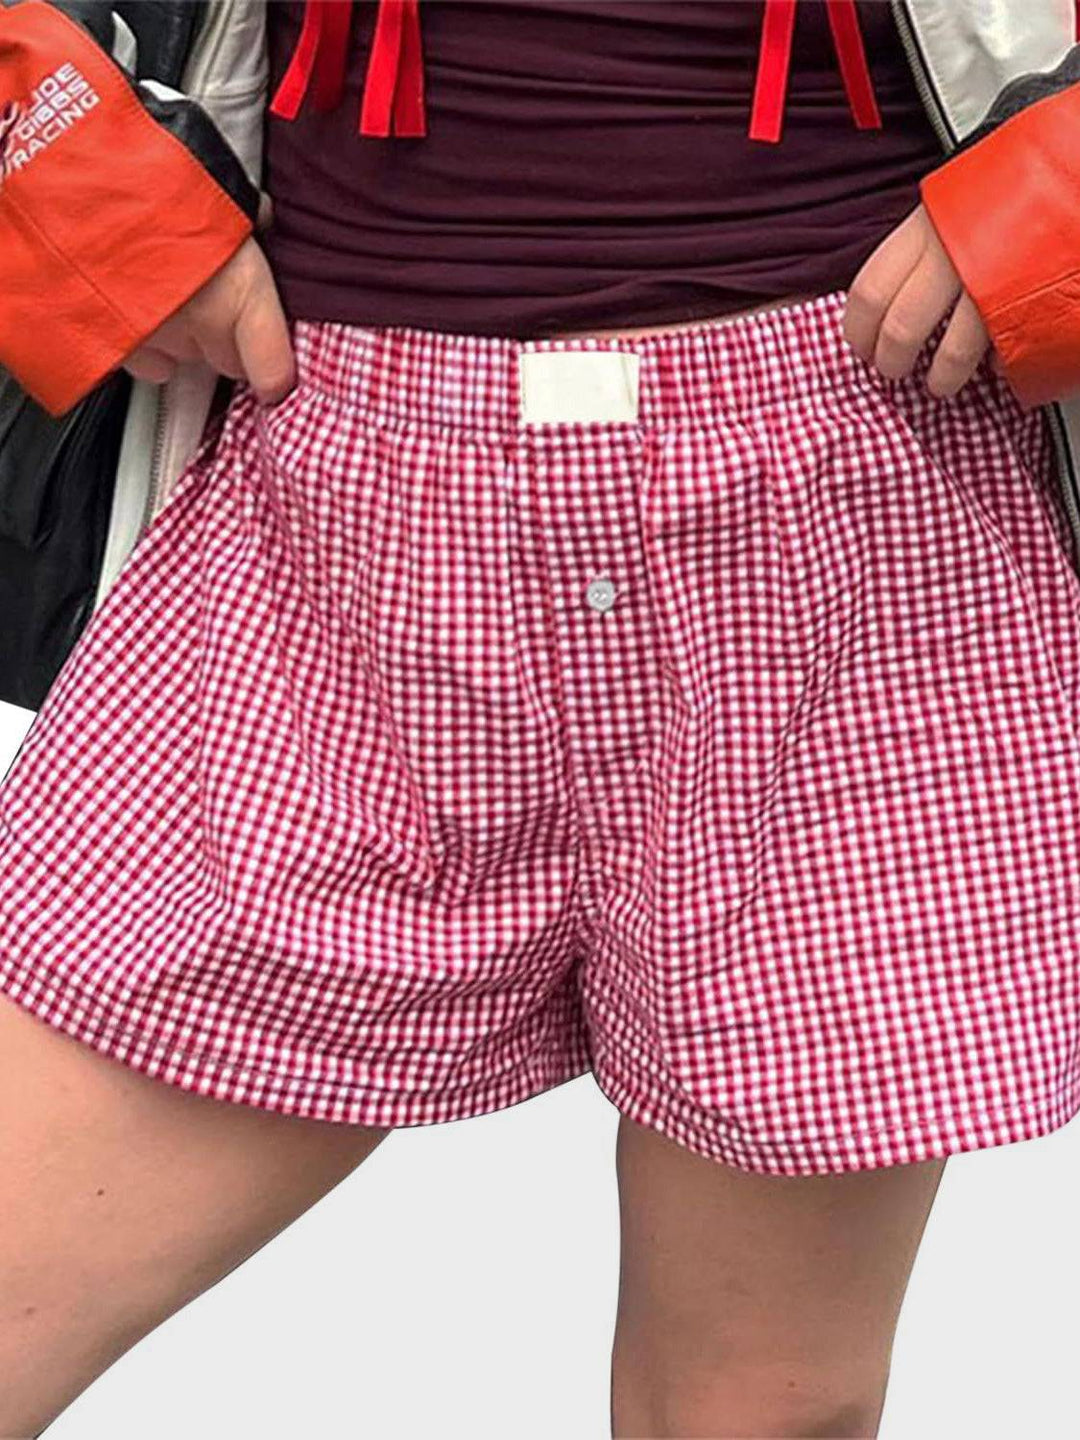 a person wearing a red and white checkered boxer shorts